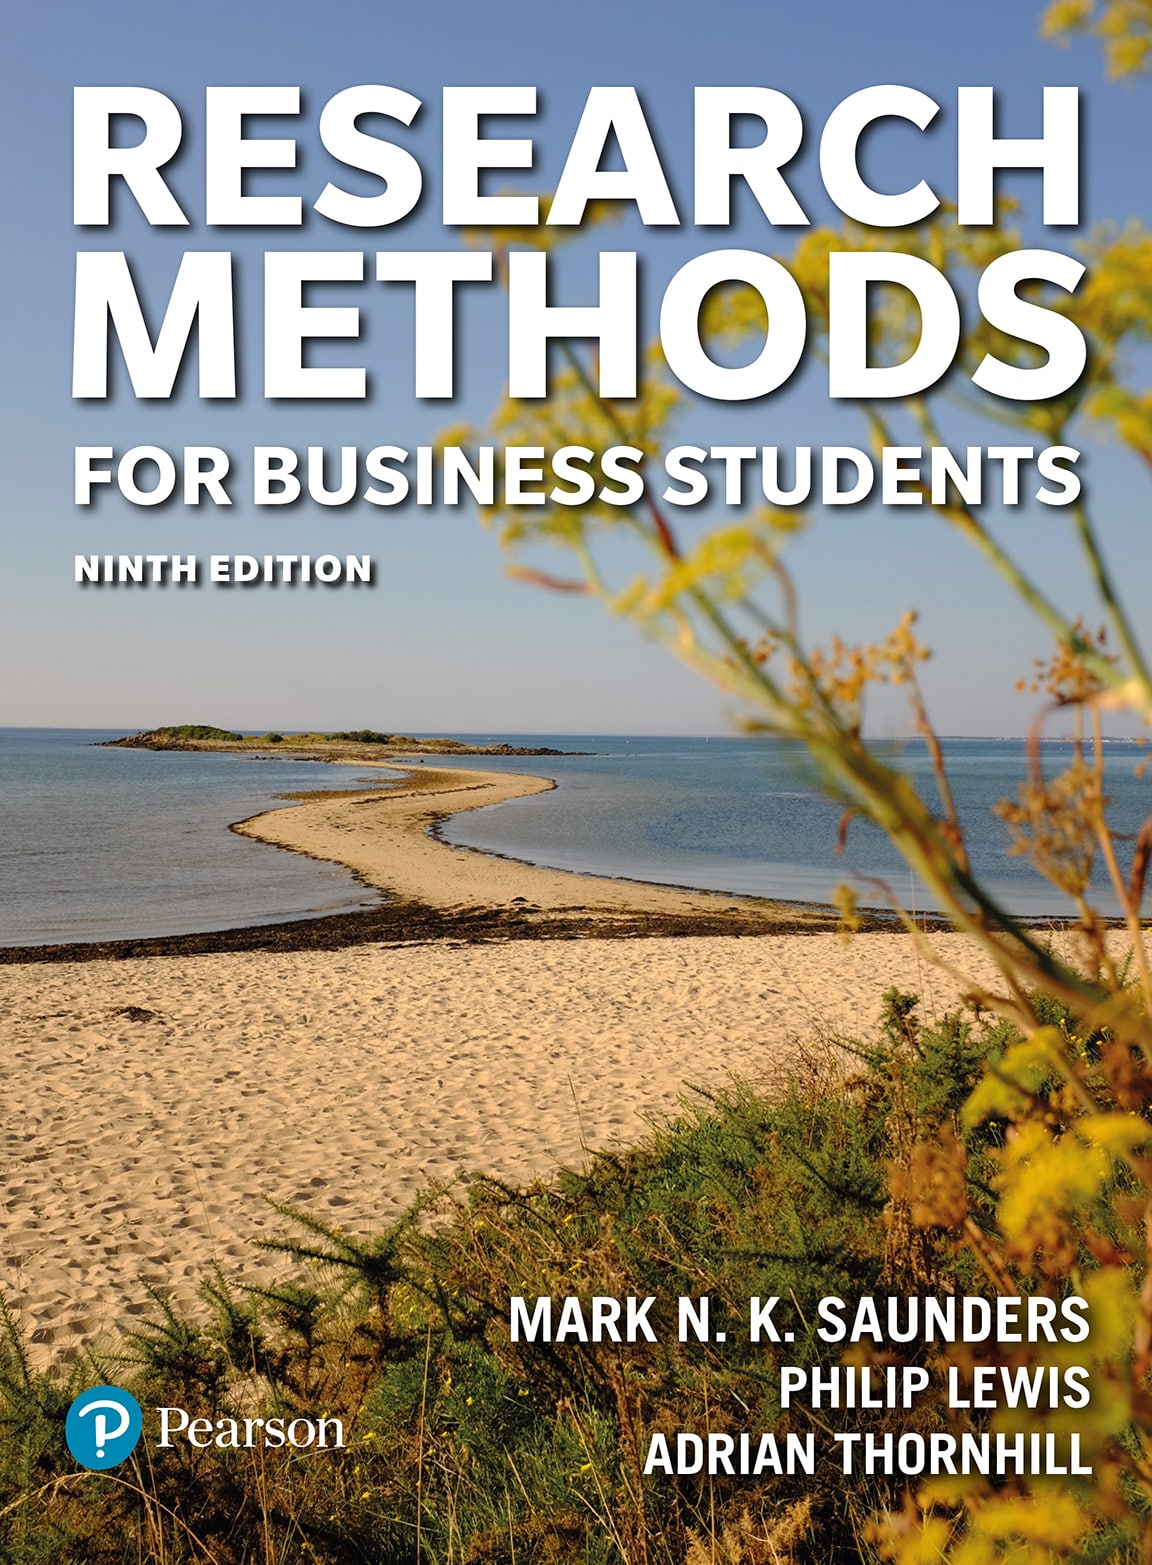 Research Methods for Business Students, 9th edition